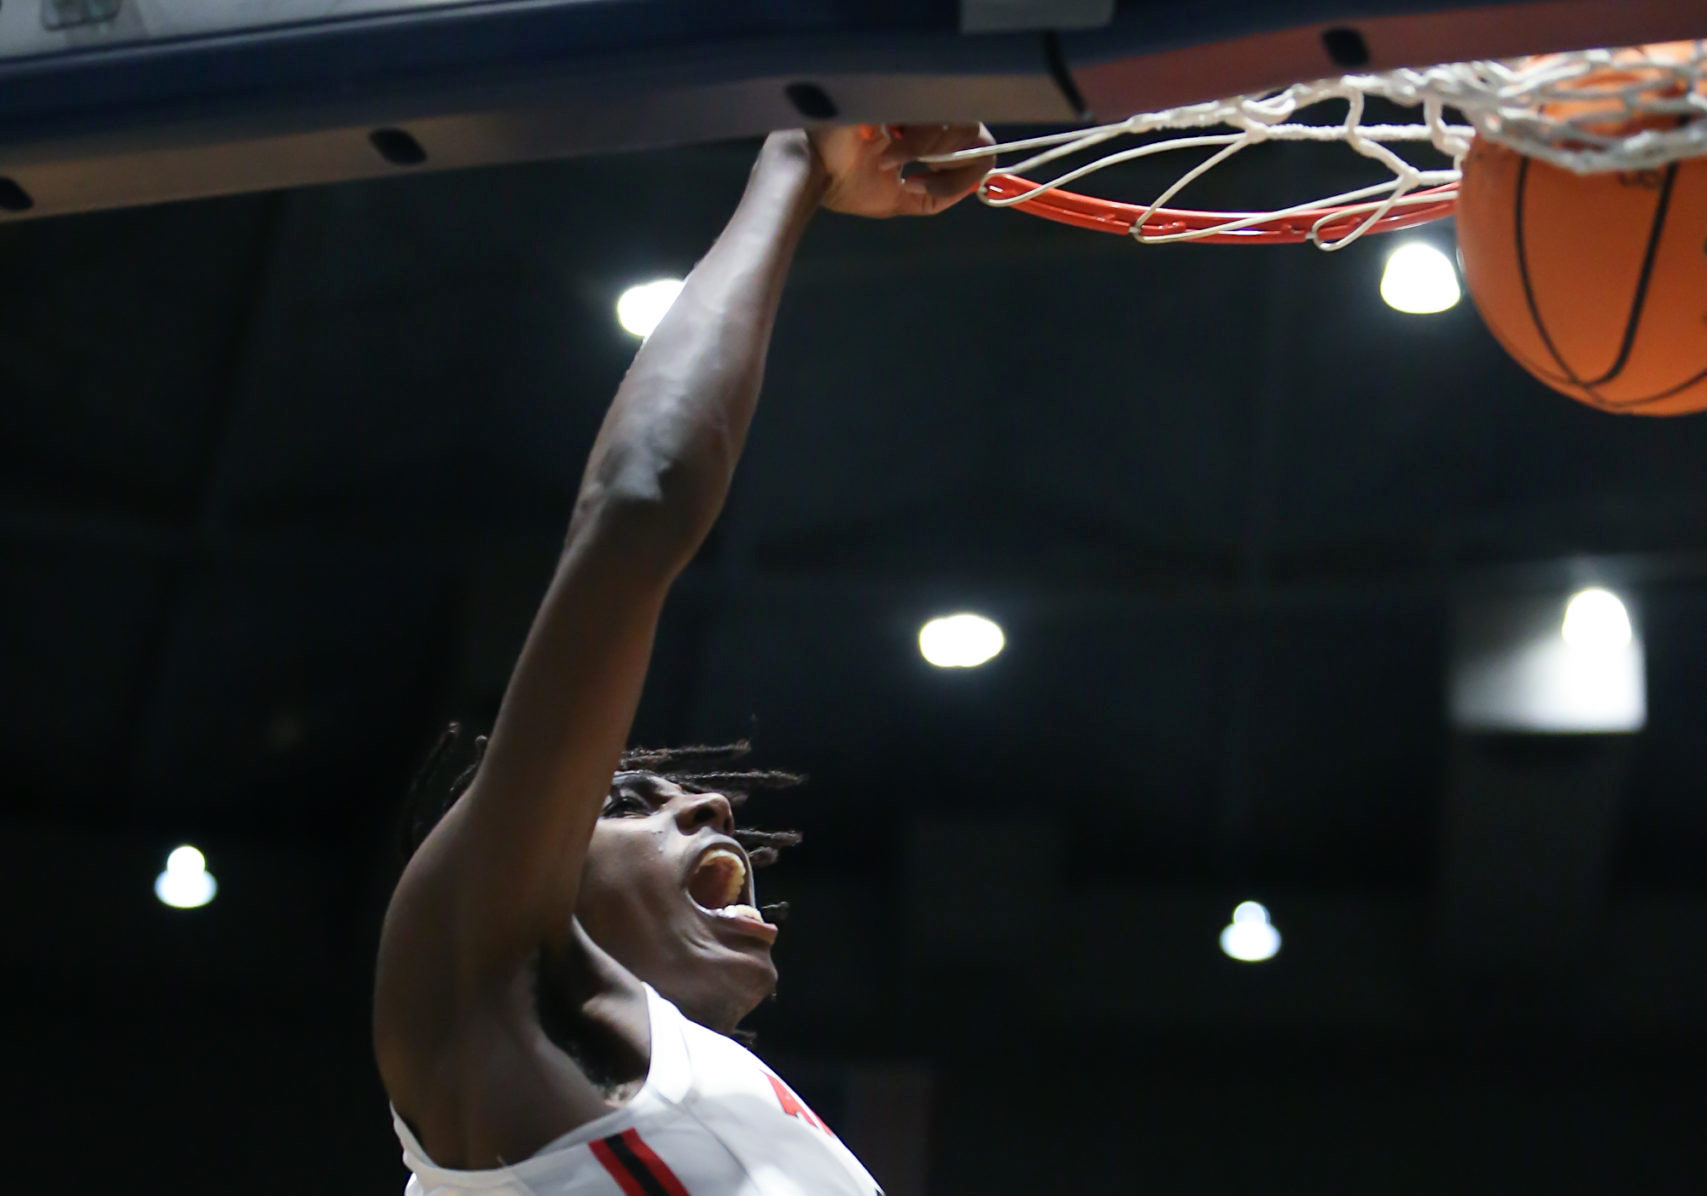 Live scores, updates, brackets from 2021 MHSAA boys and girls basketball state finals at the Mississippi Coliseum